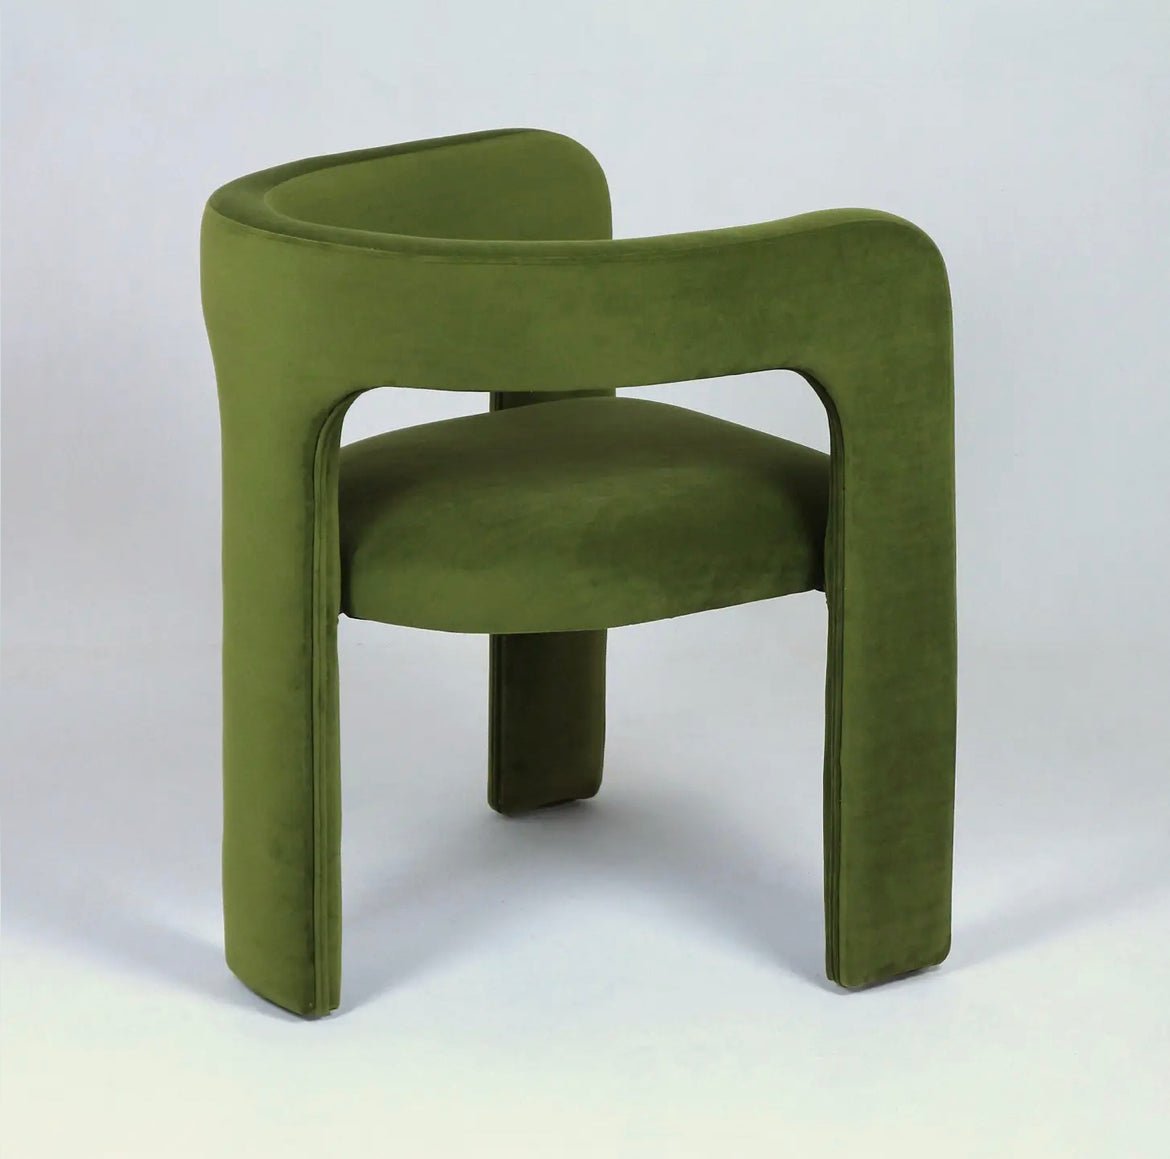 ‘C Back’ Dining Chair (Mohair) - EcoLuxe Furnishings